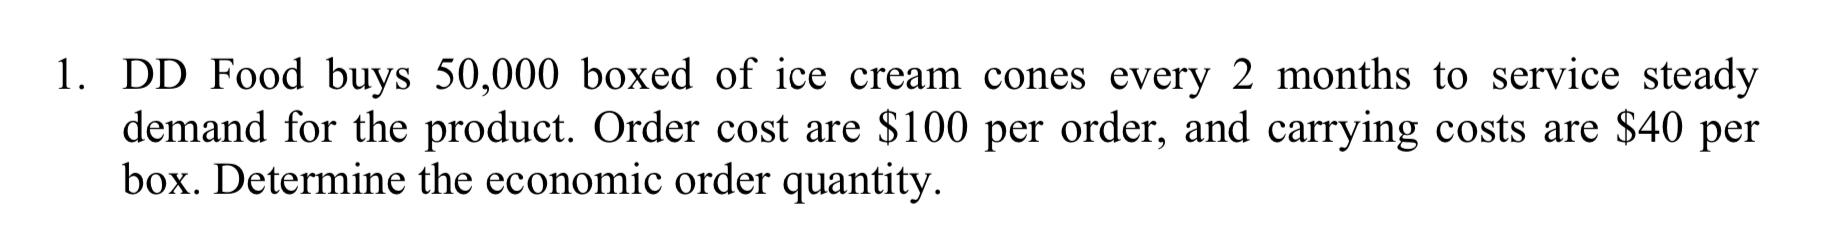 Solved 1. DD Food buys 50,000 boxed of ice cream cones every